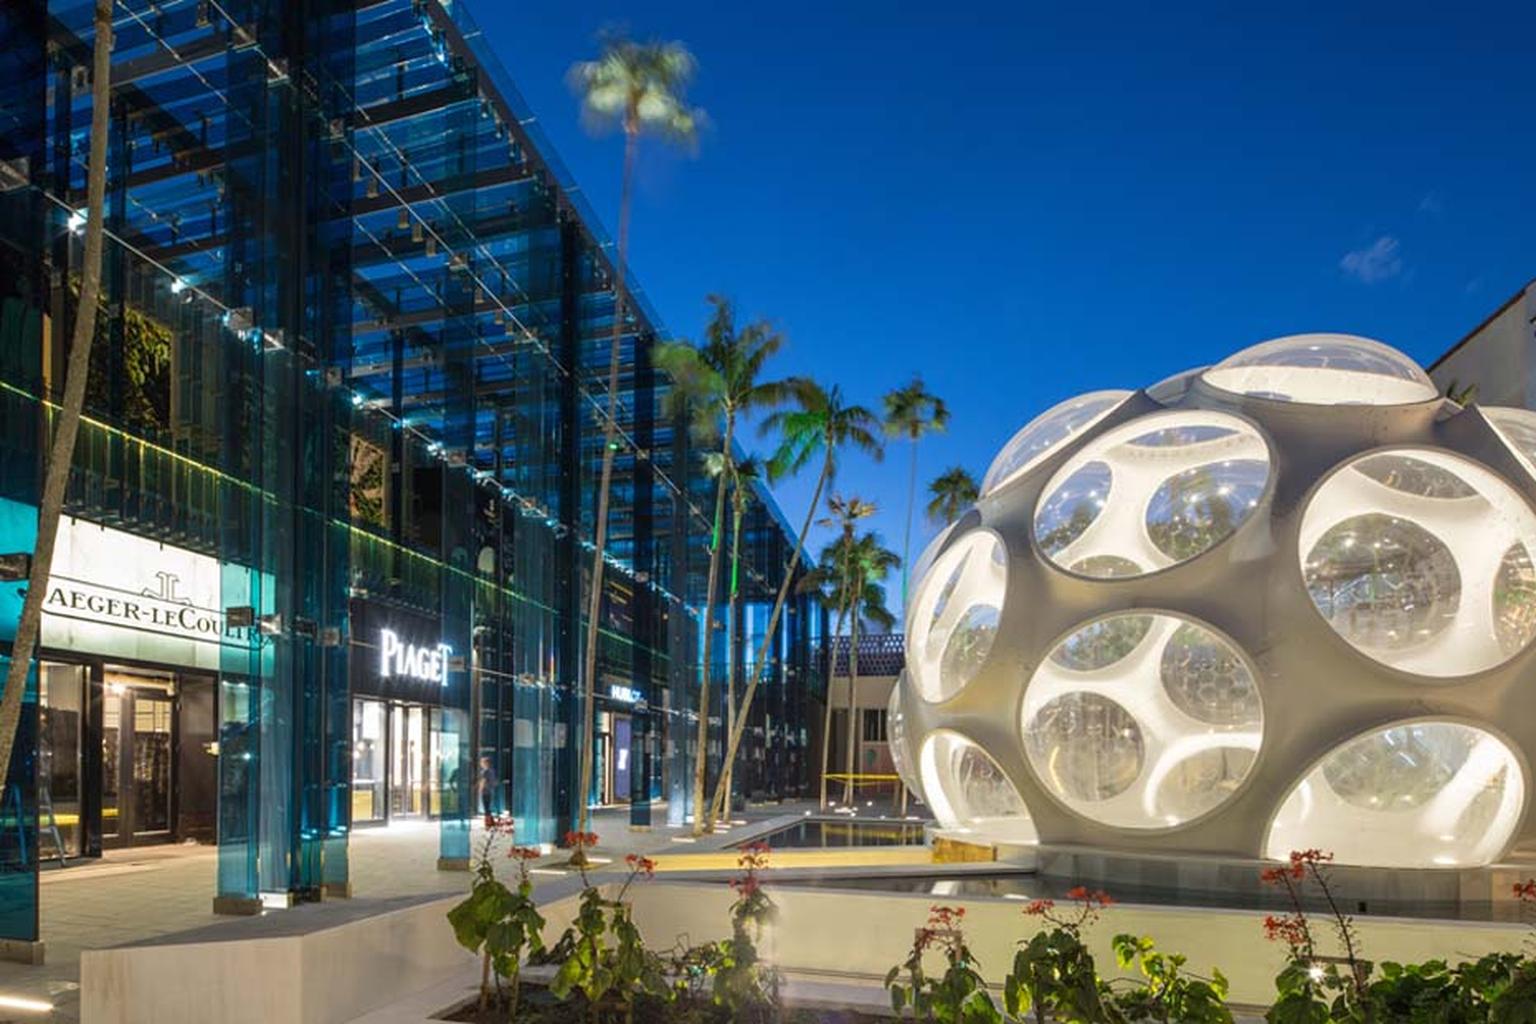 Fifteen years ago entrepreneur Craig Robins, a Miami native, recognized the potential of the Miami Design District and starting procuring properties in the area. Today, it is one of the most up and coming areas and is home to a plethora of top brand names